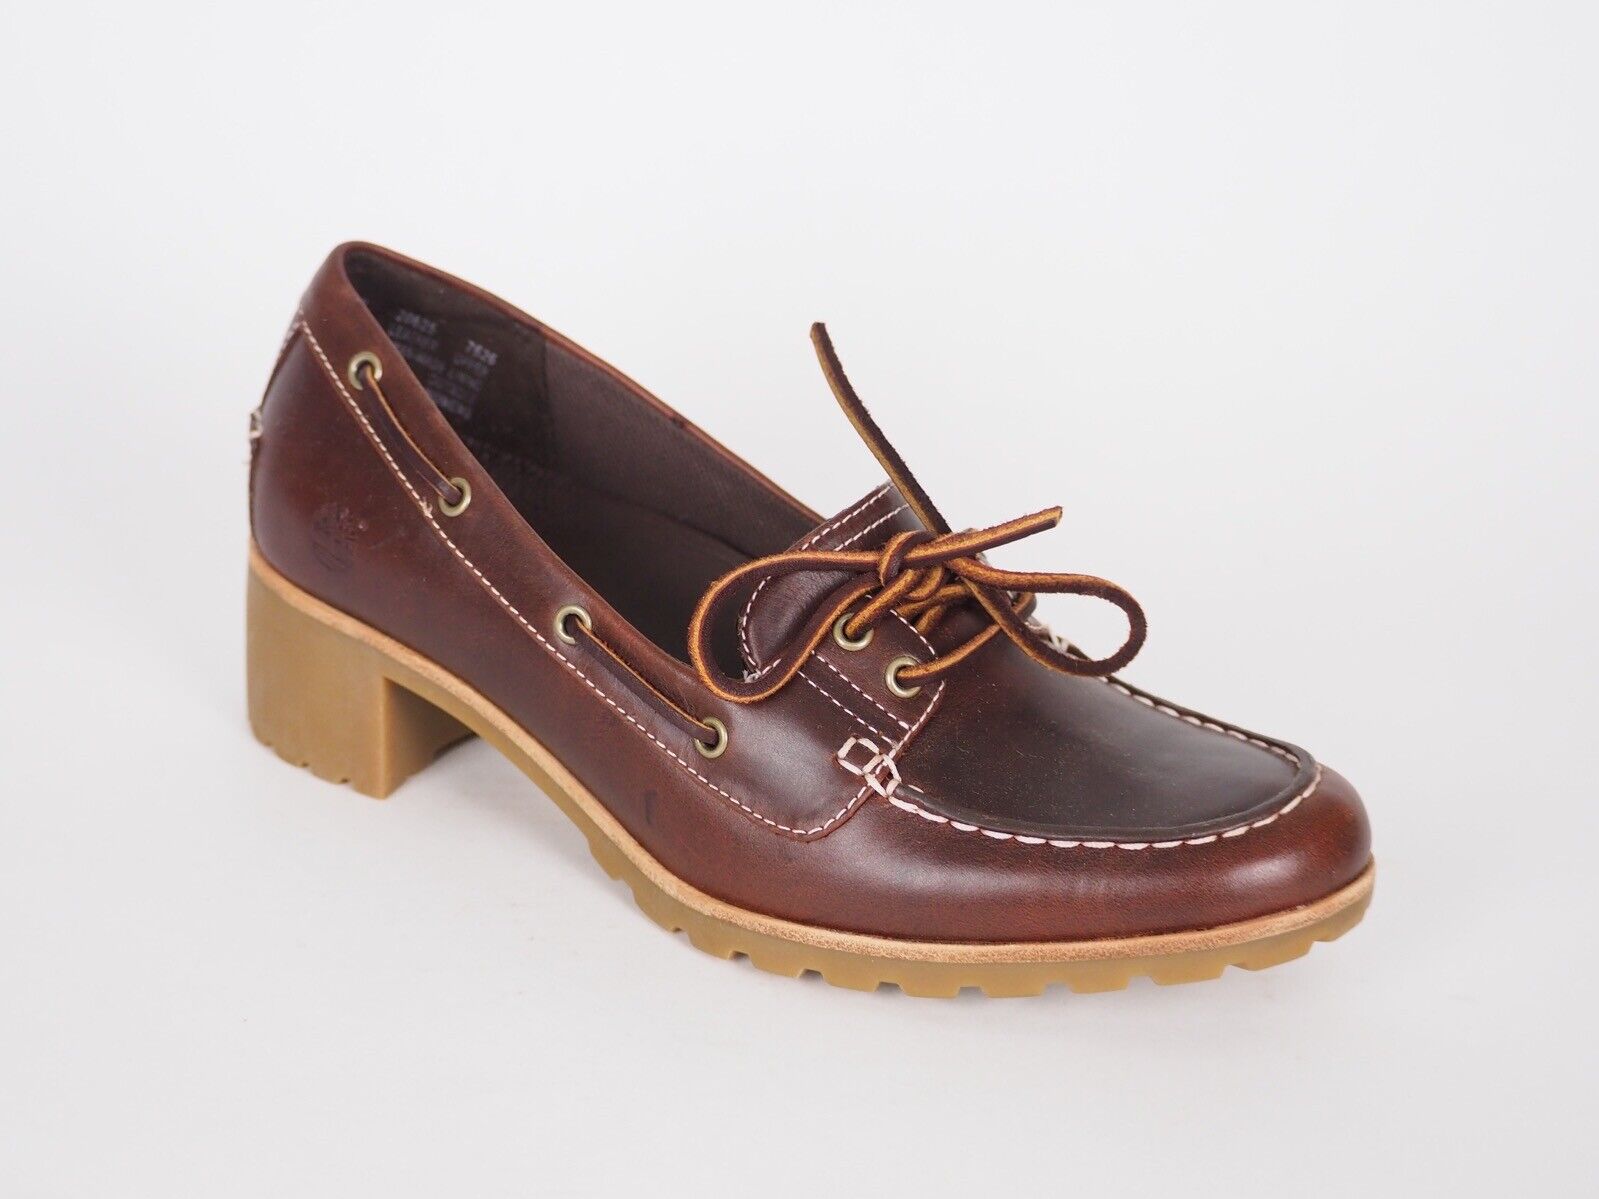 Womens Timberland Bergen 20625 Brown Leather 2 Eye Heeled Deck Boat Shoes - London Top Style